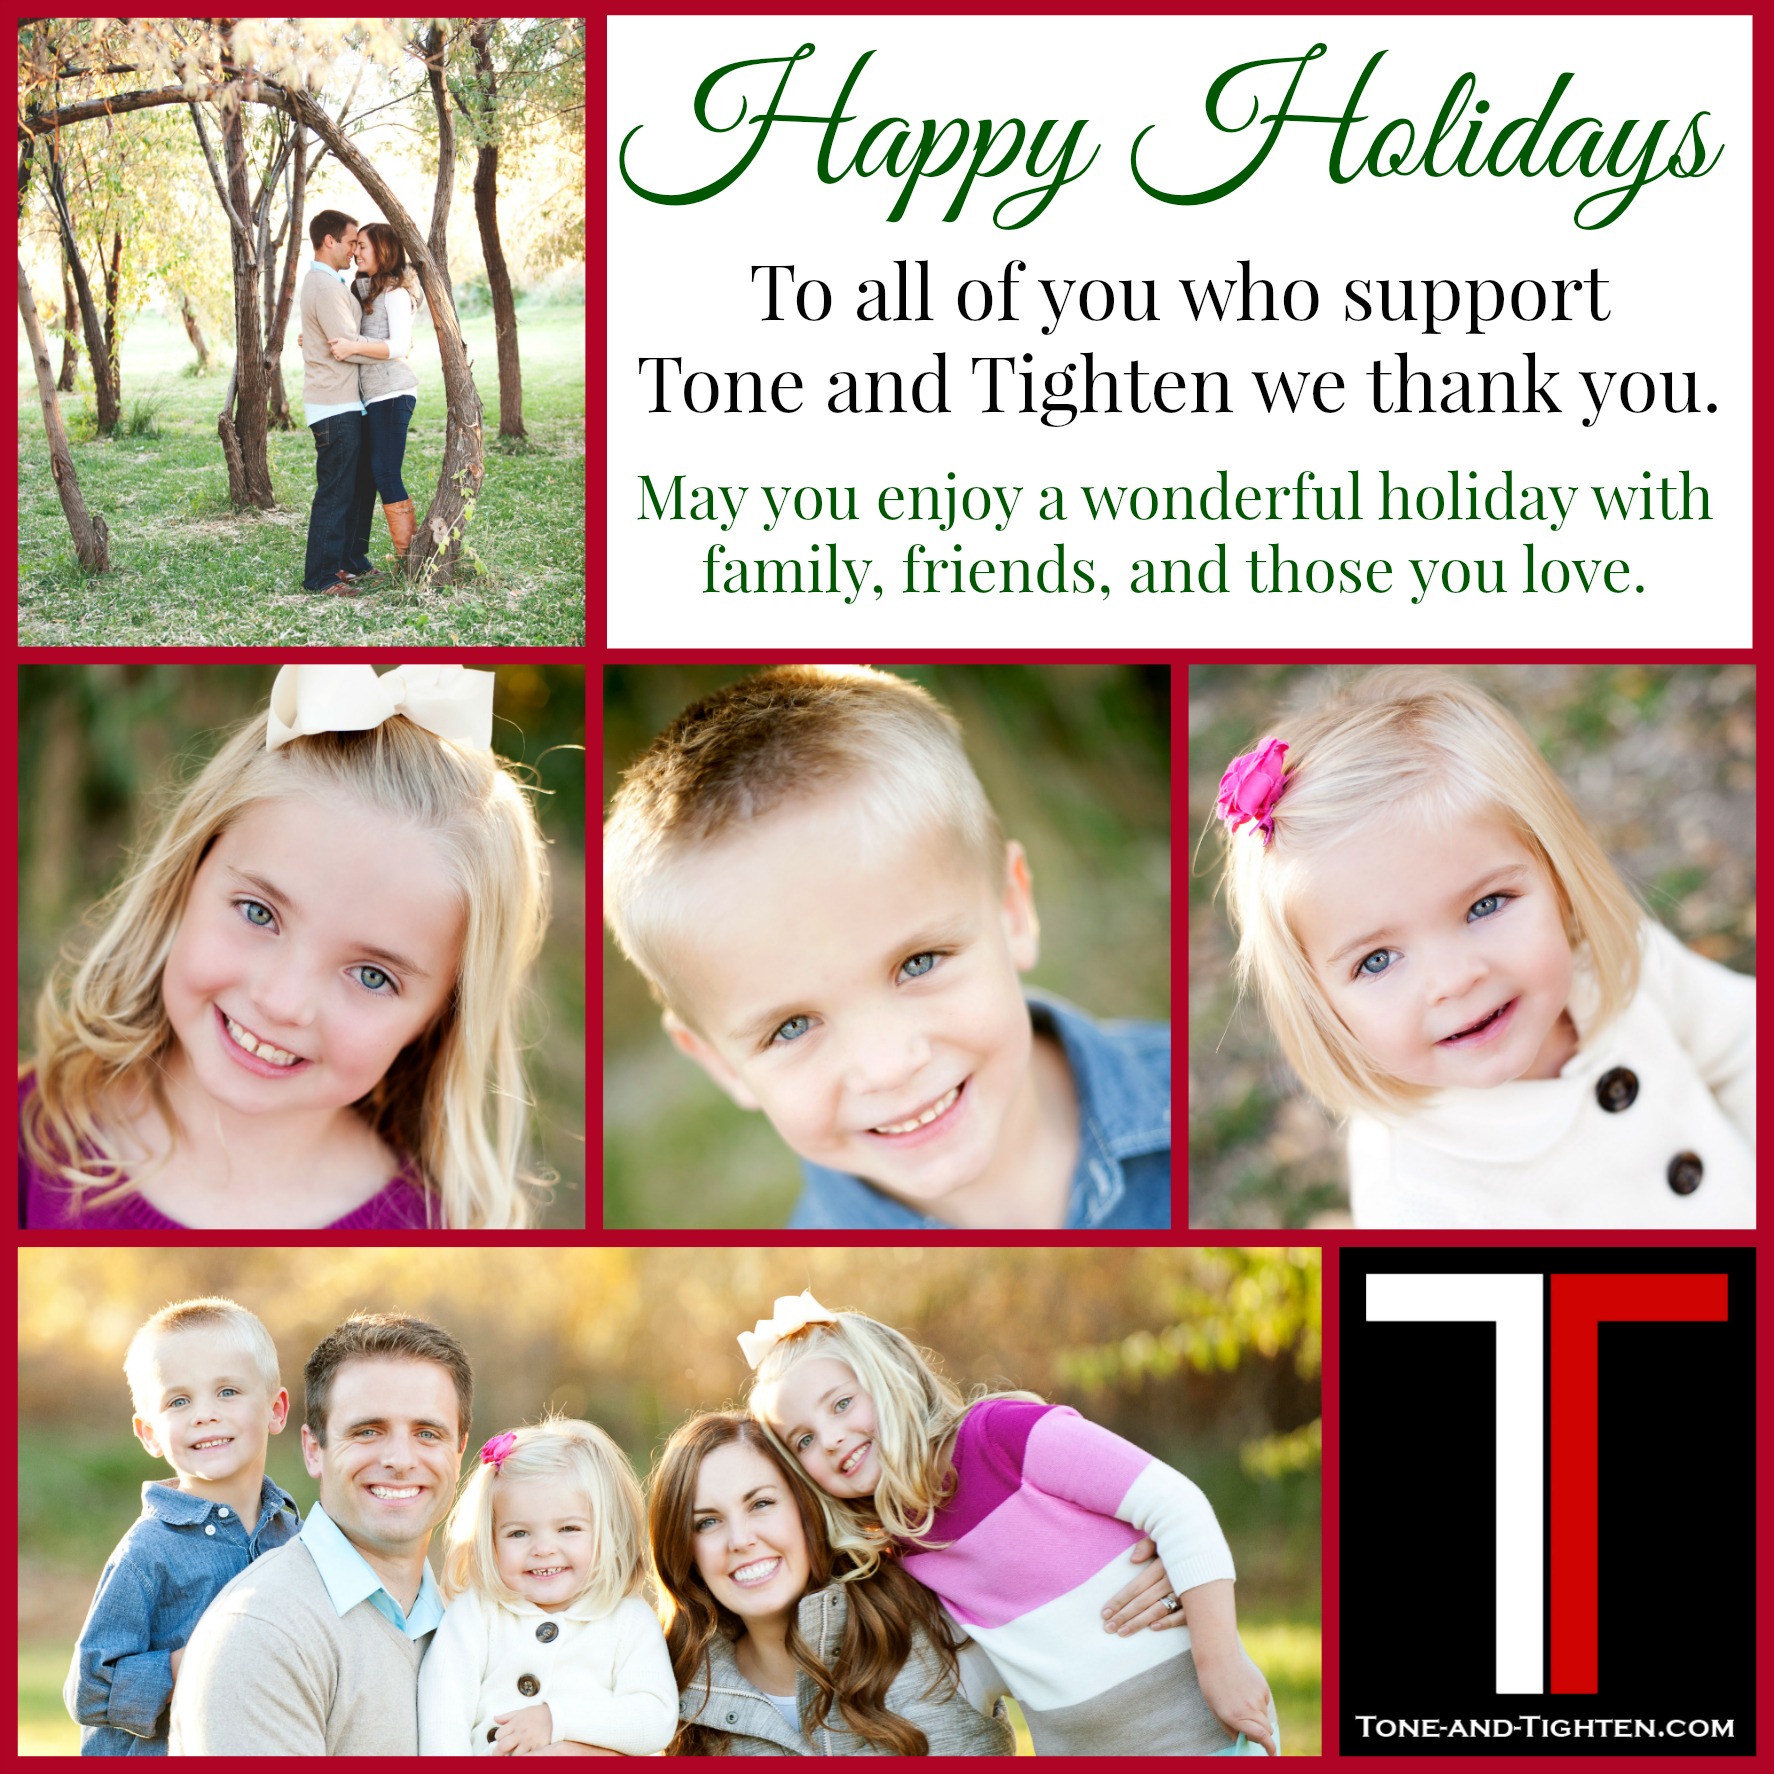 Merry Christmas from Tone and Tighten!!